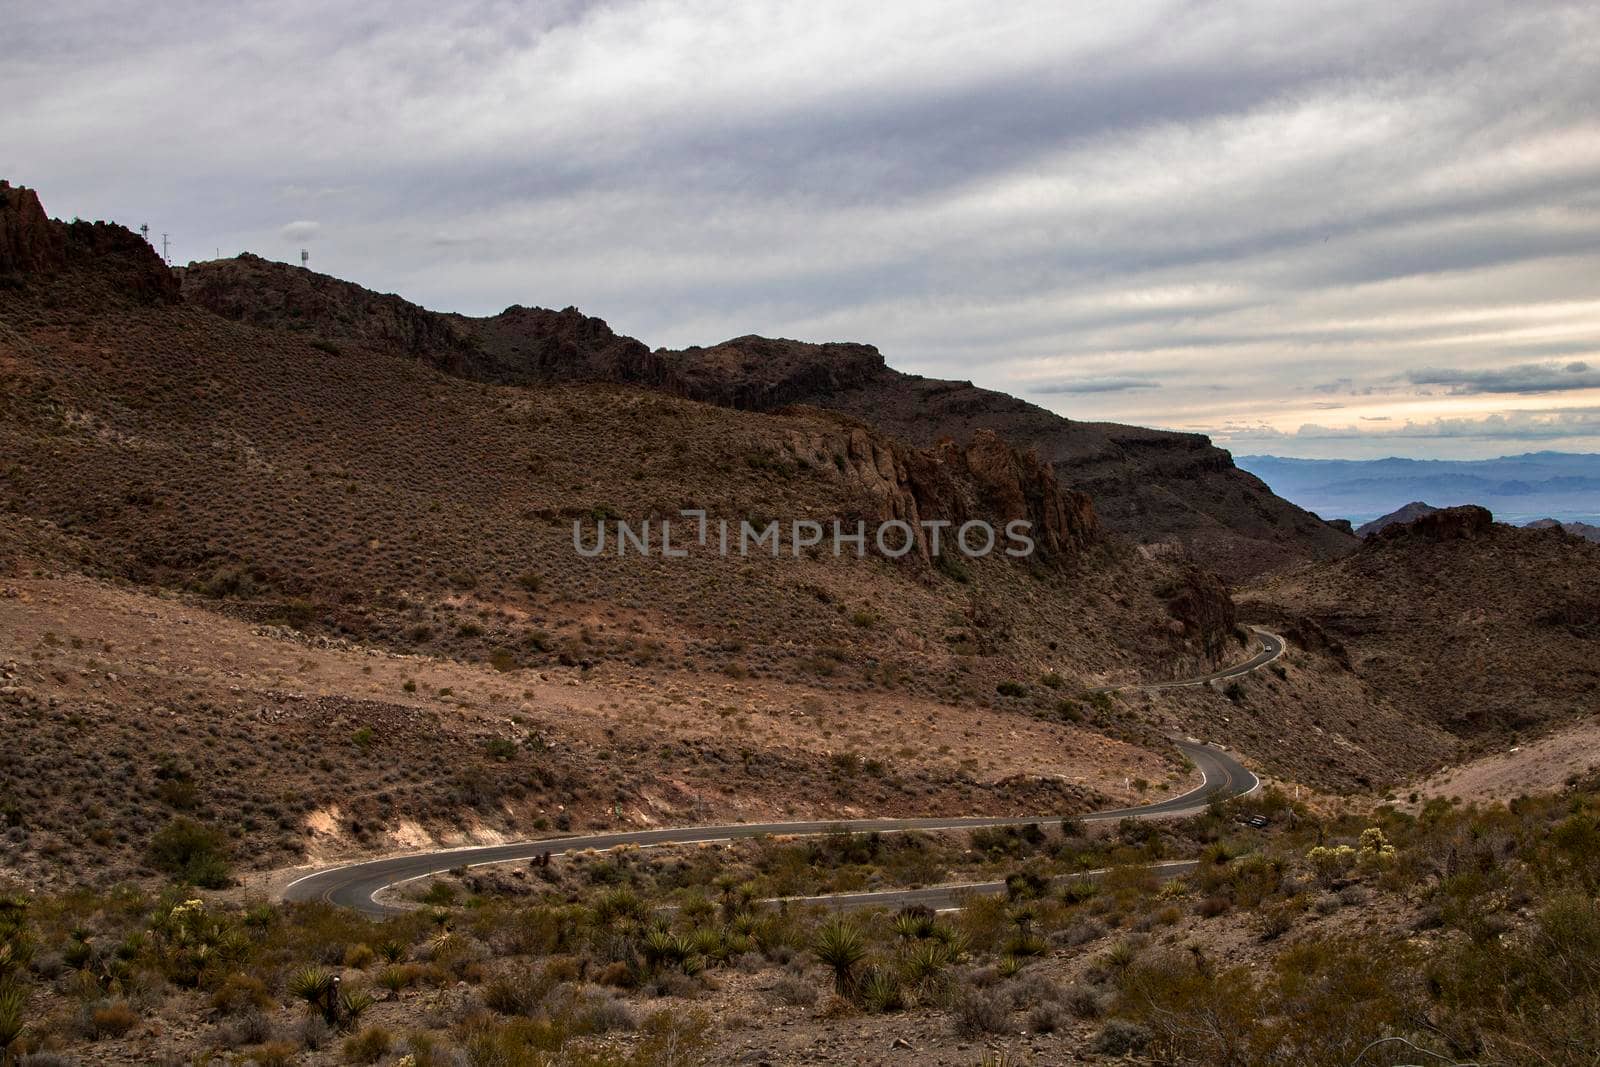 Curved road in a mountain under a cloudy sky in Arizona